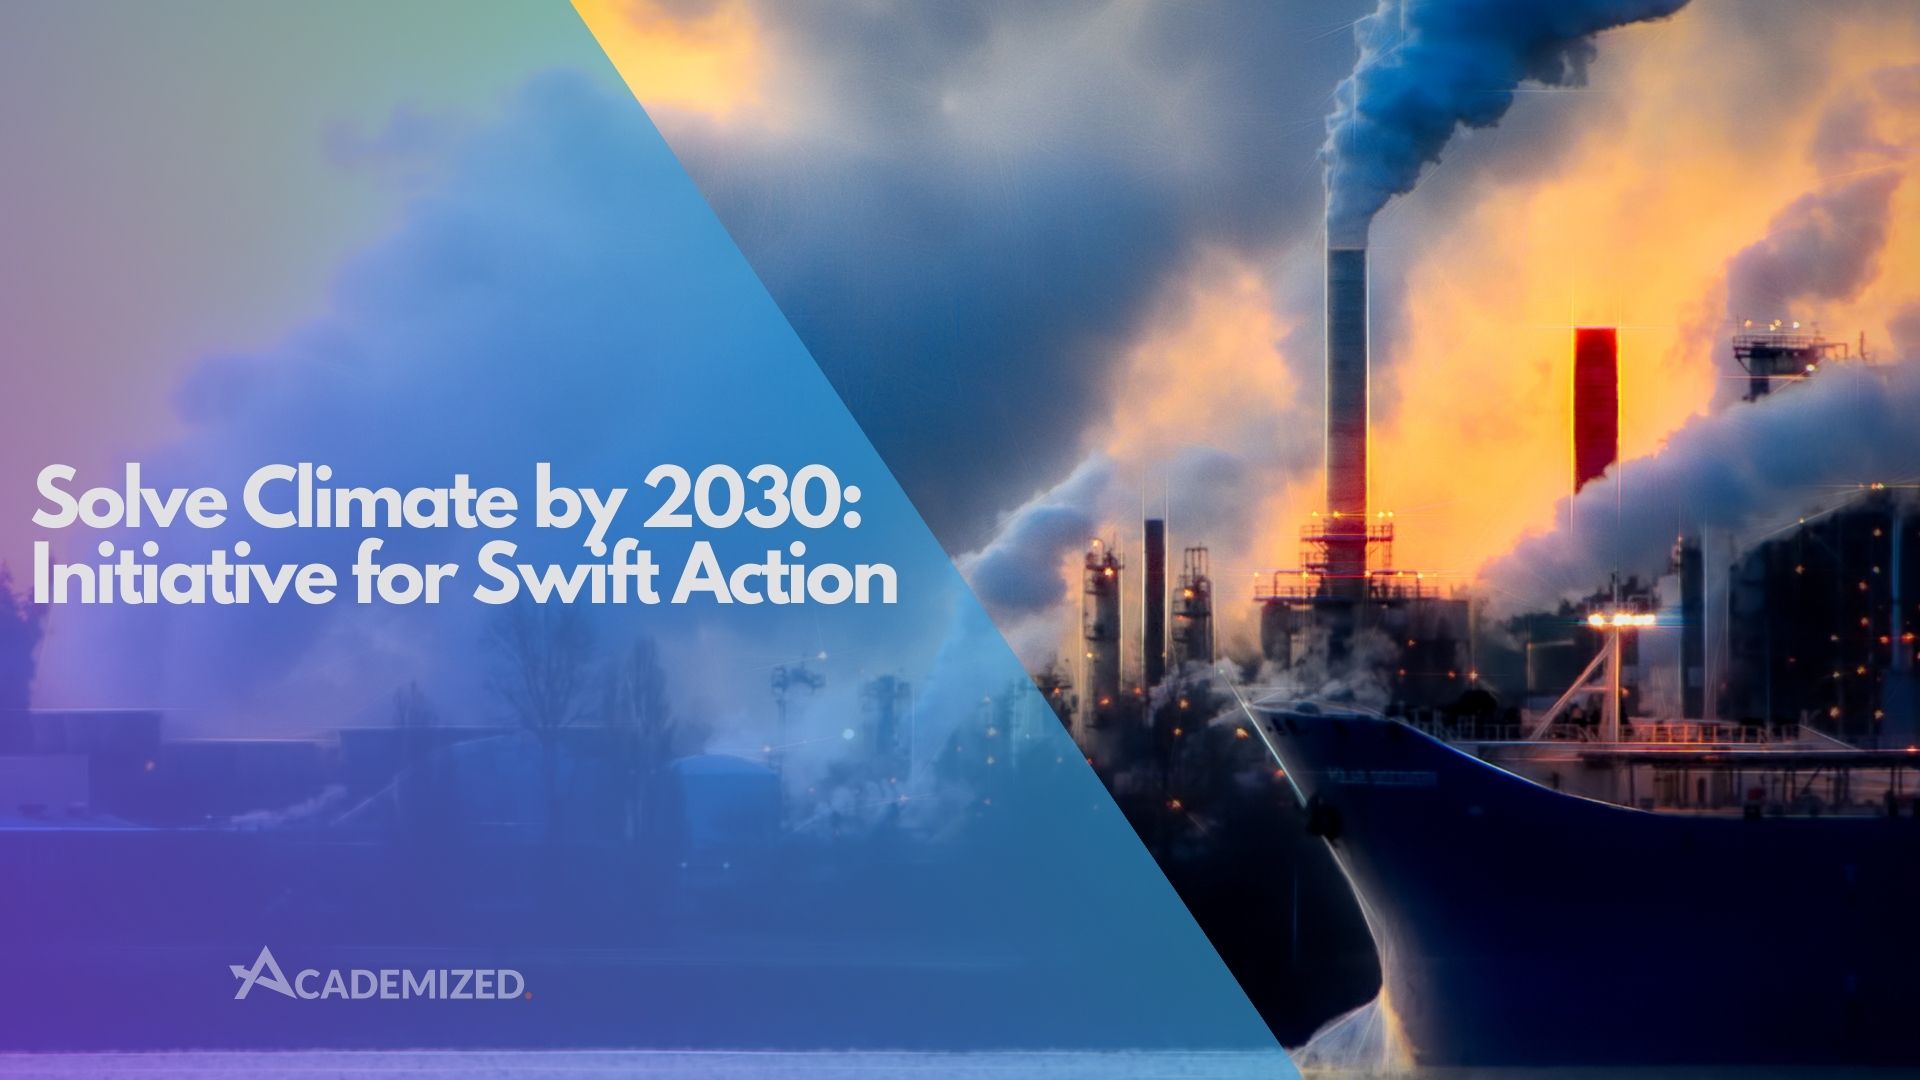 Climate Change: A Call for Swift Action and Decentralized Solutions by 2030